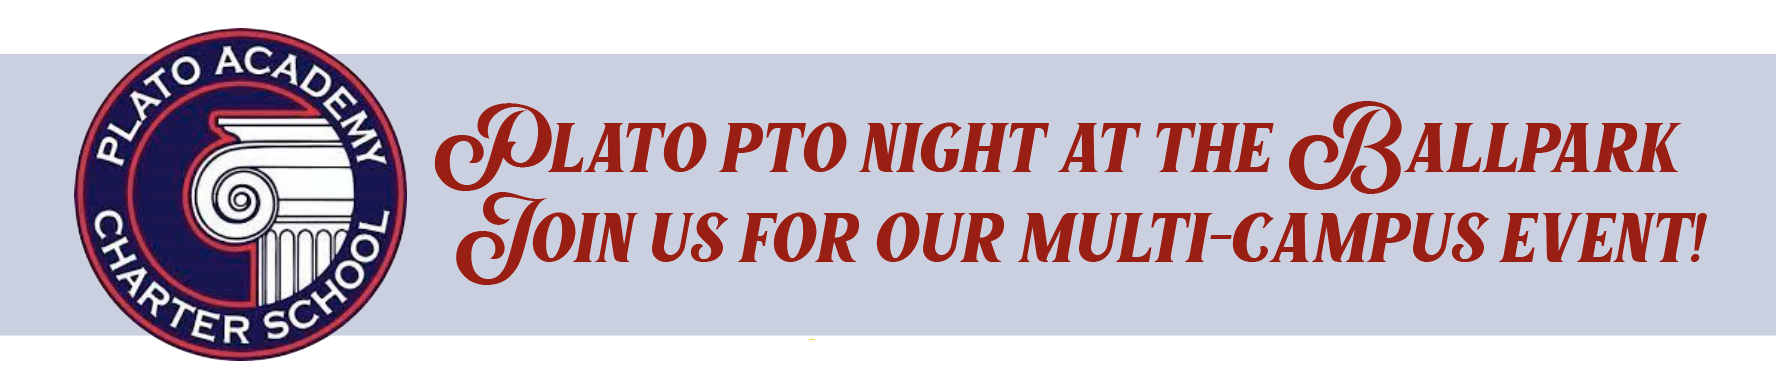 Plato PTO night at the Ballpark: Join us for our multi-campus event!